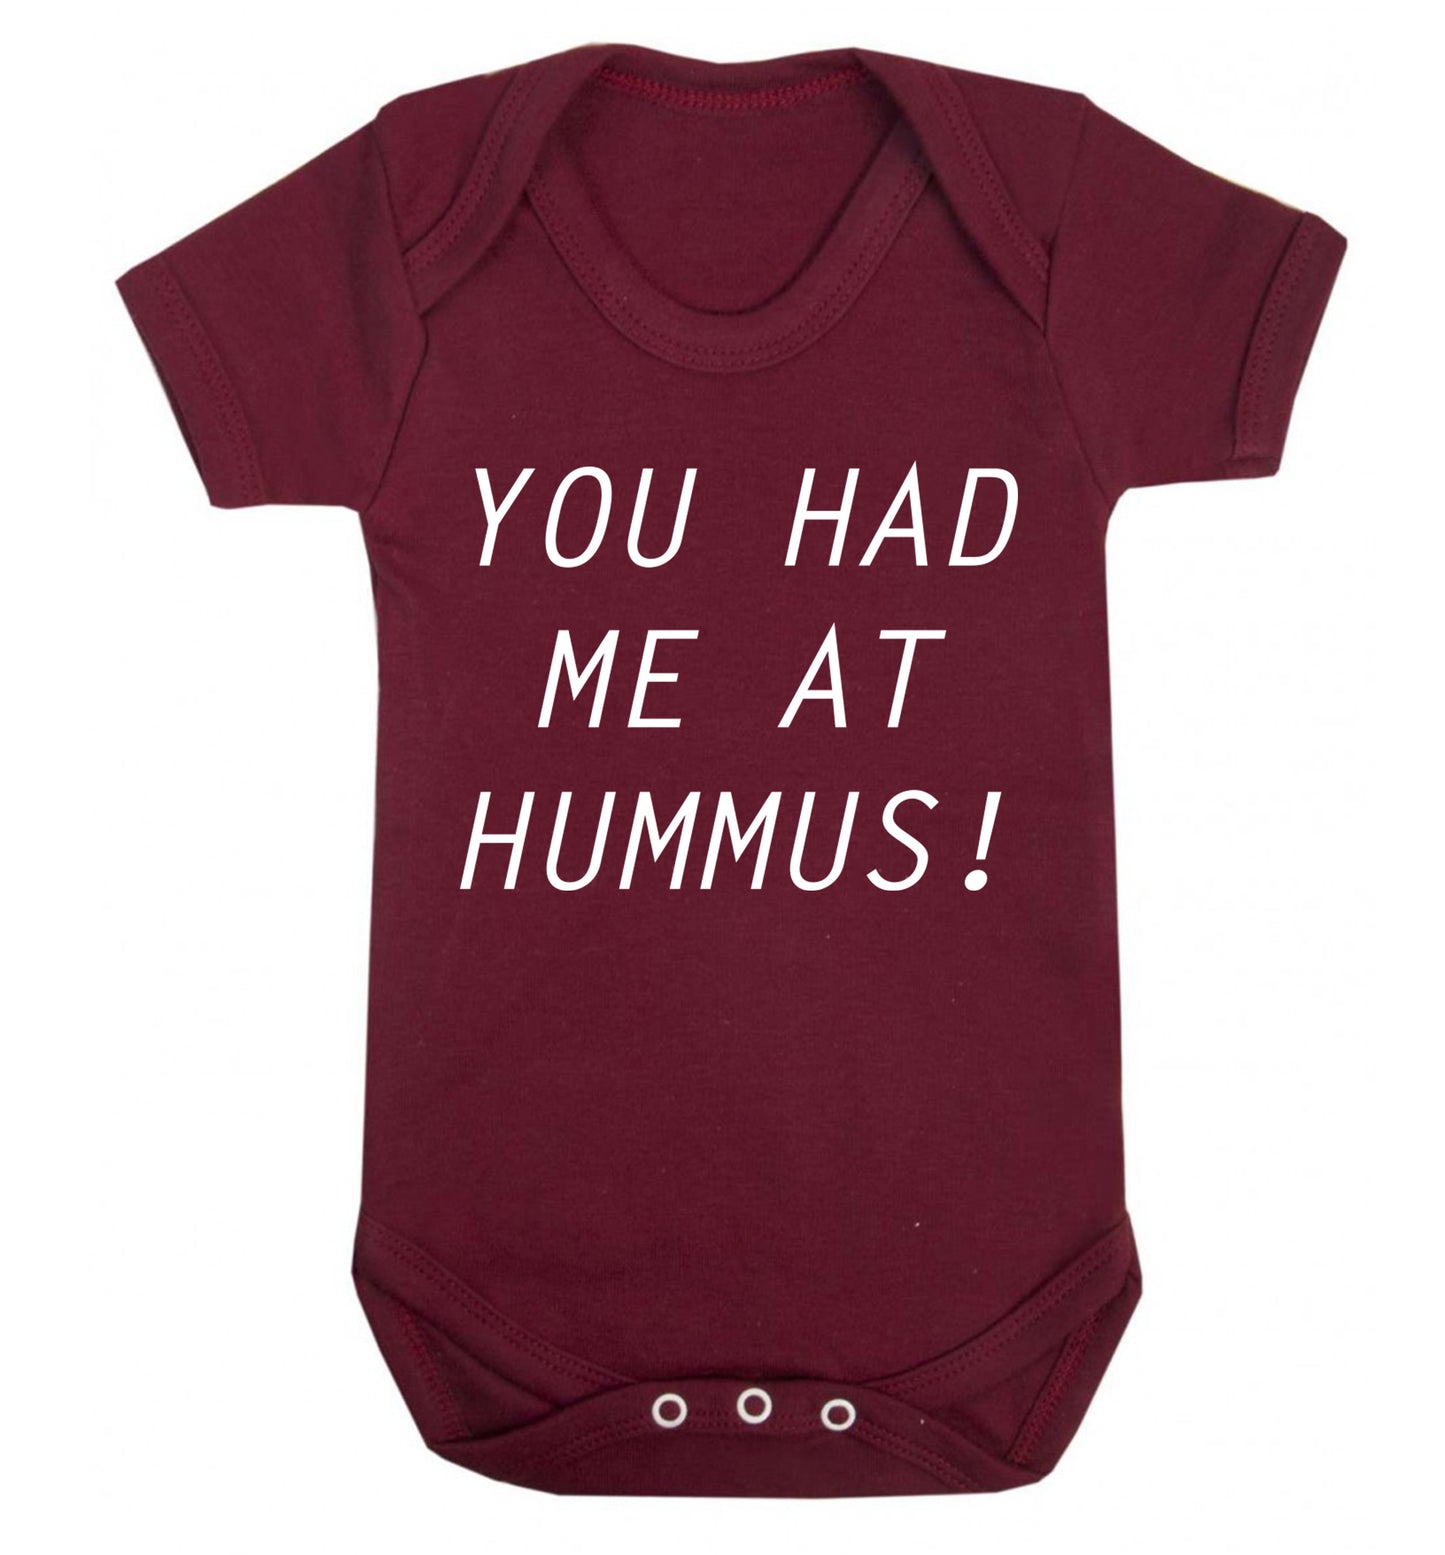 You had me at hummus Baby Vest maroon 18-24 months